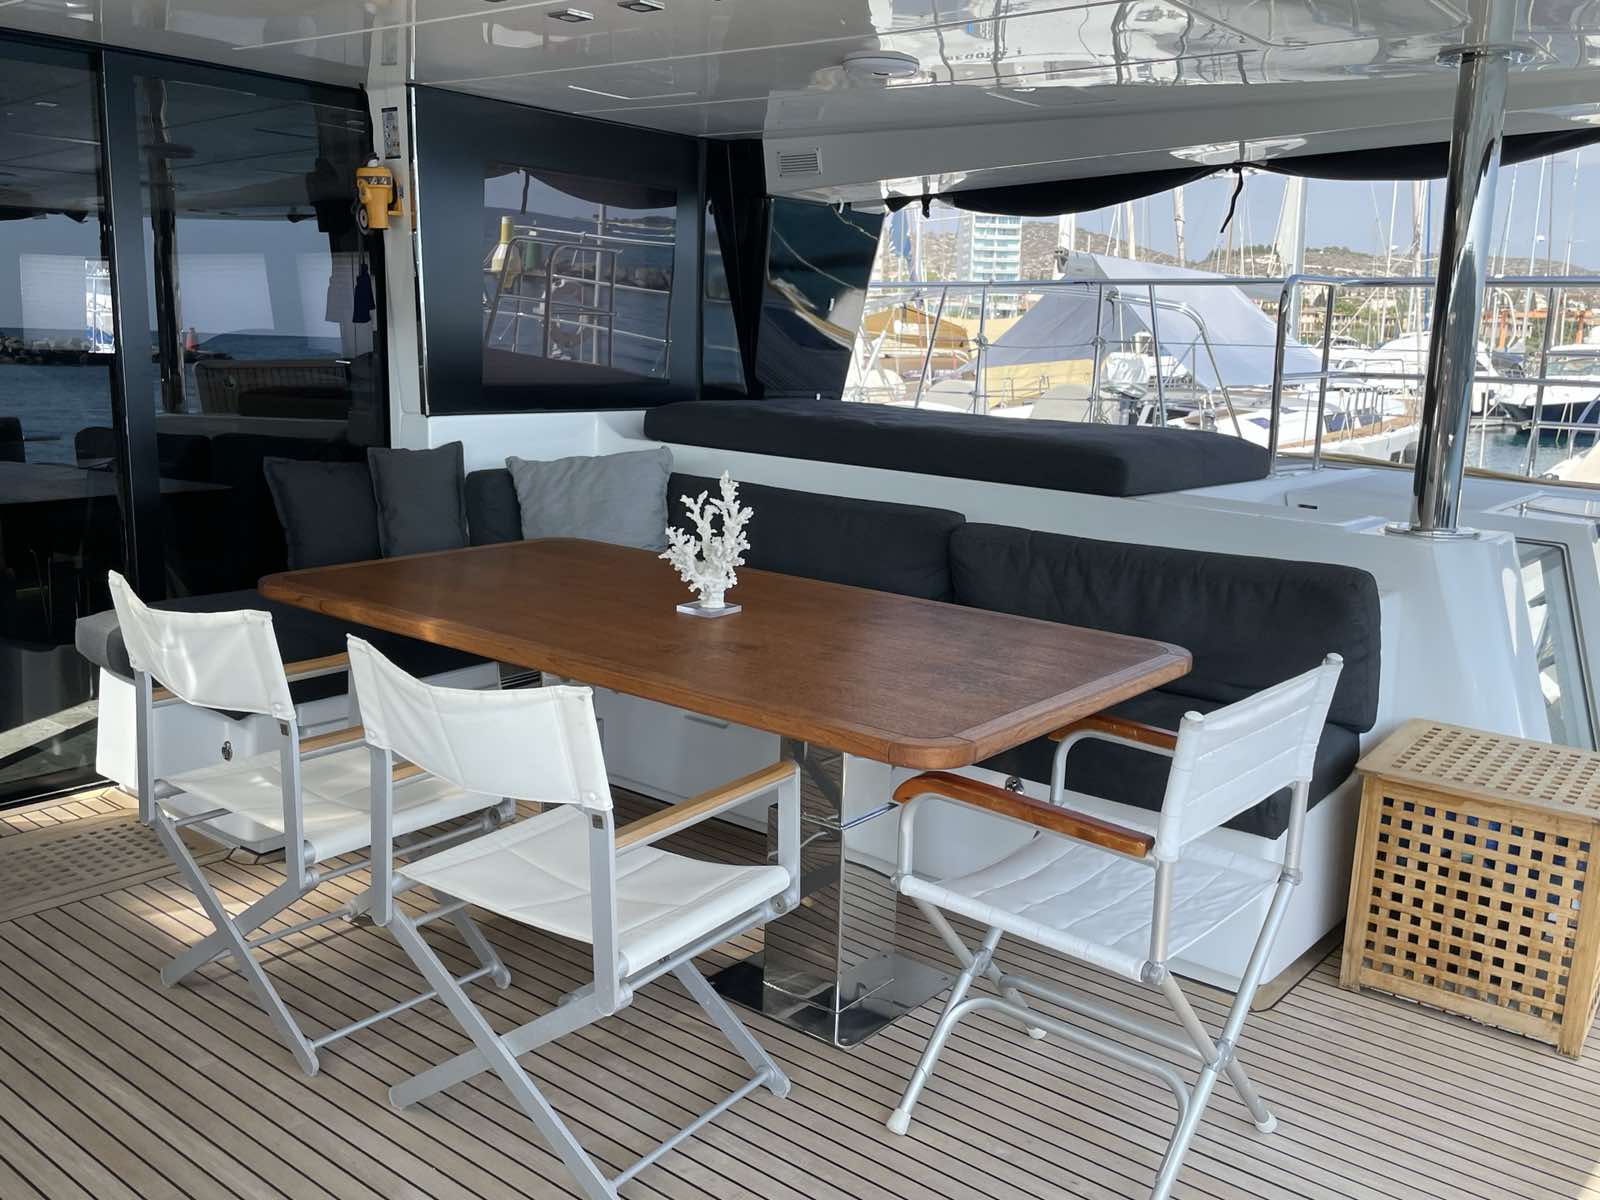 Aft deck flexible dining space